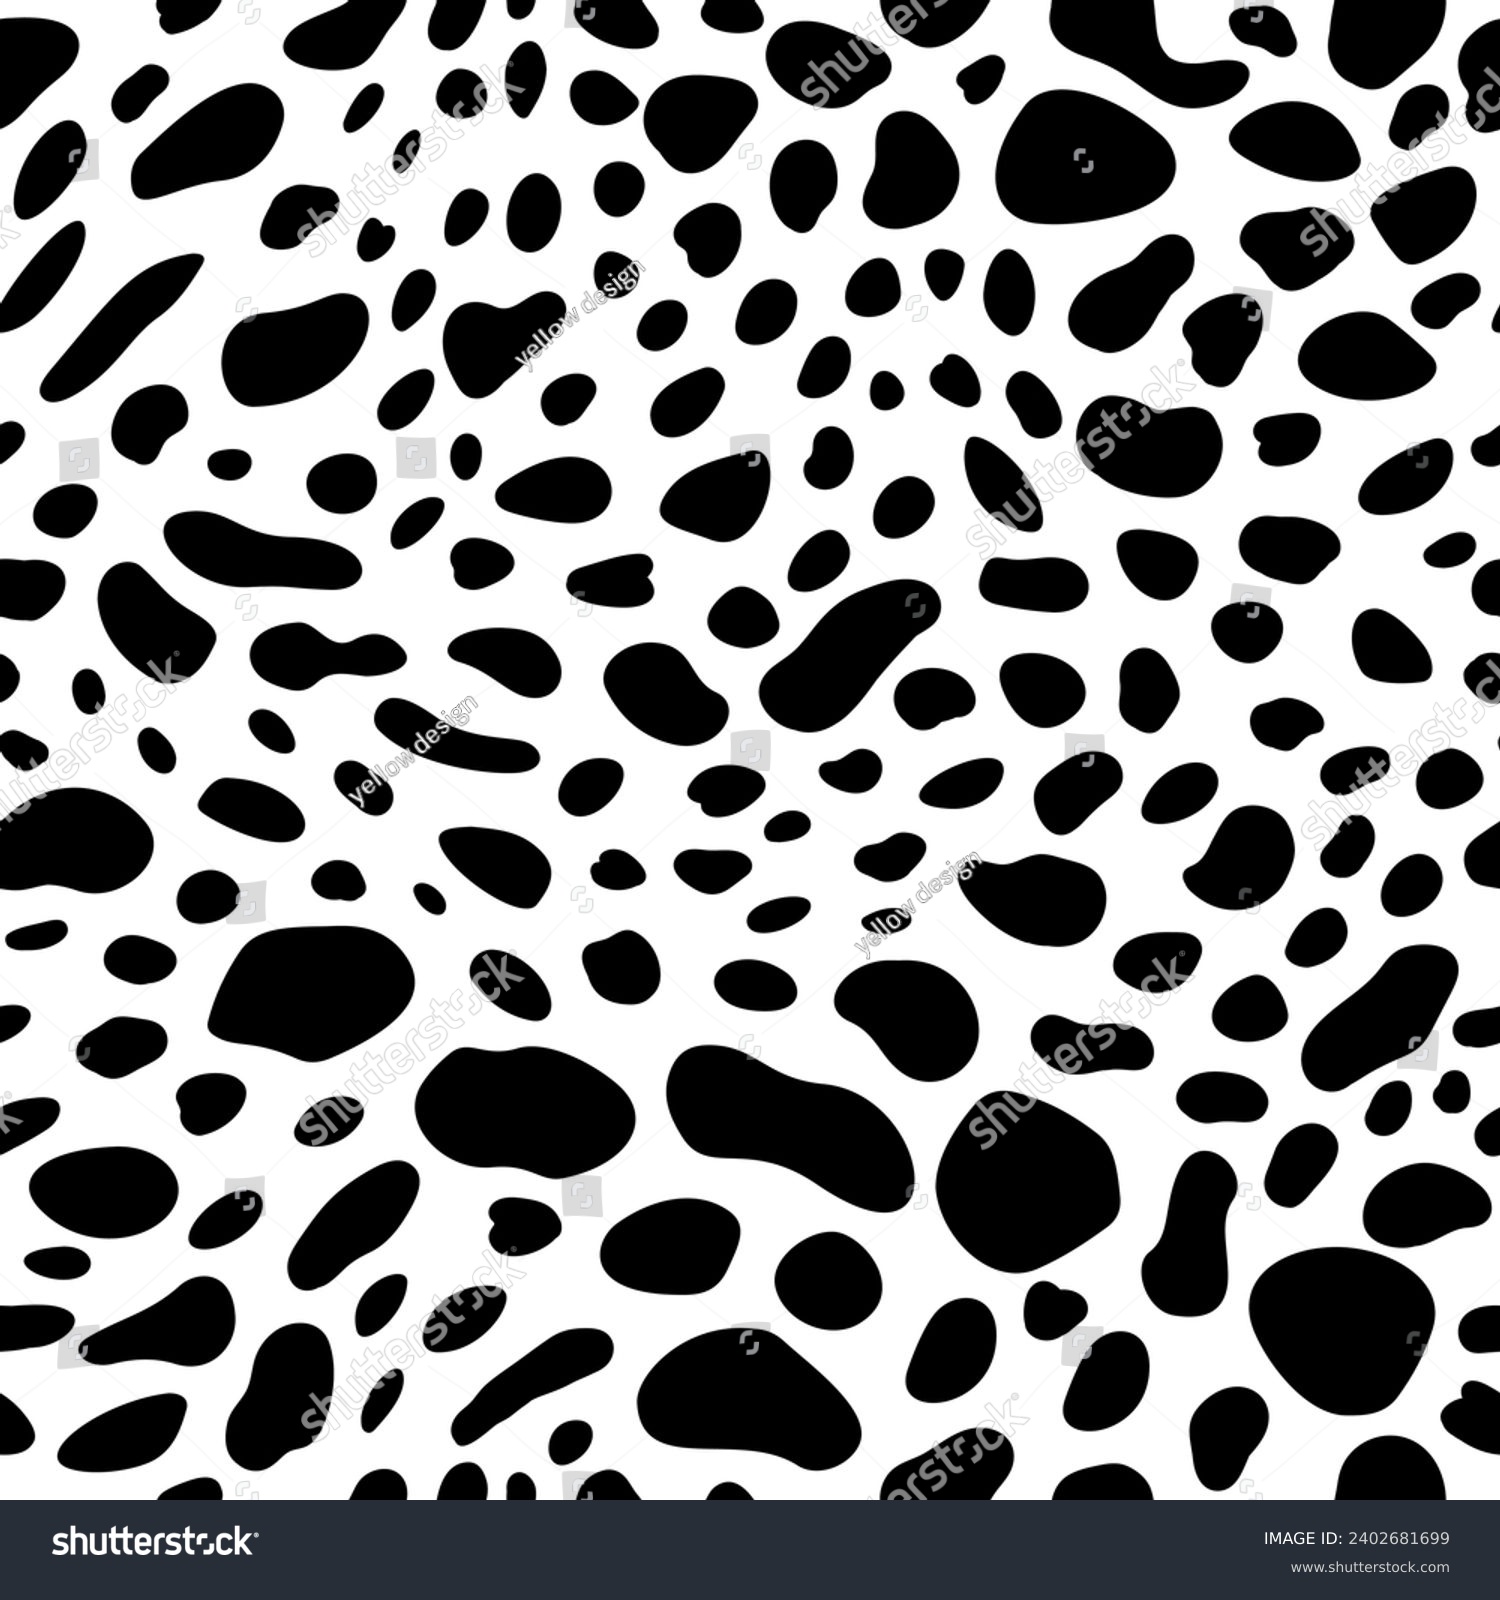 SVG of Seamless pattern with Dalmatian spots and cow prints. Animal fur texture surface. Abstract black and white speckled design. Perfect for textile, wallpaper, and wrapping paper. svg